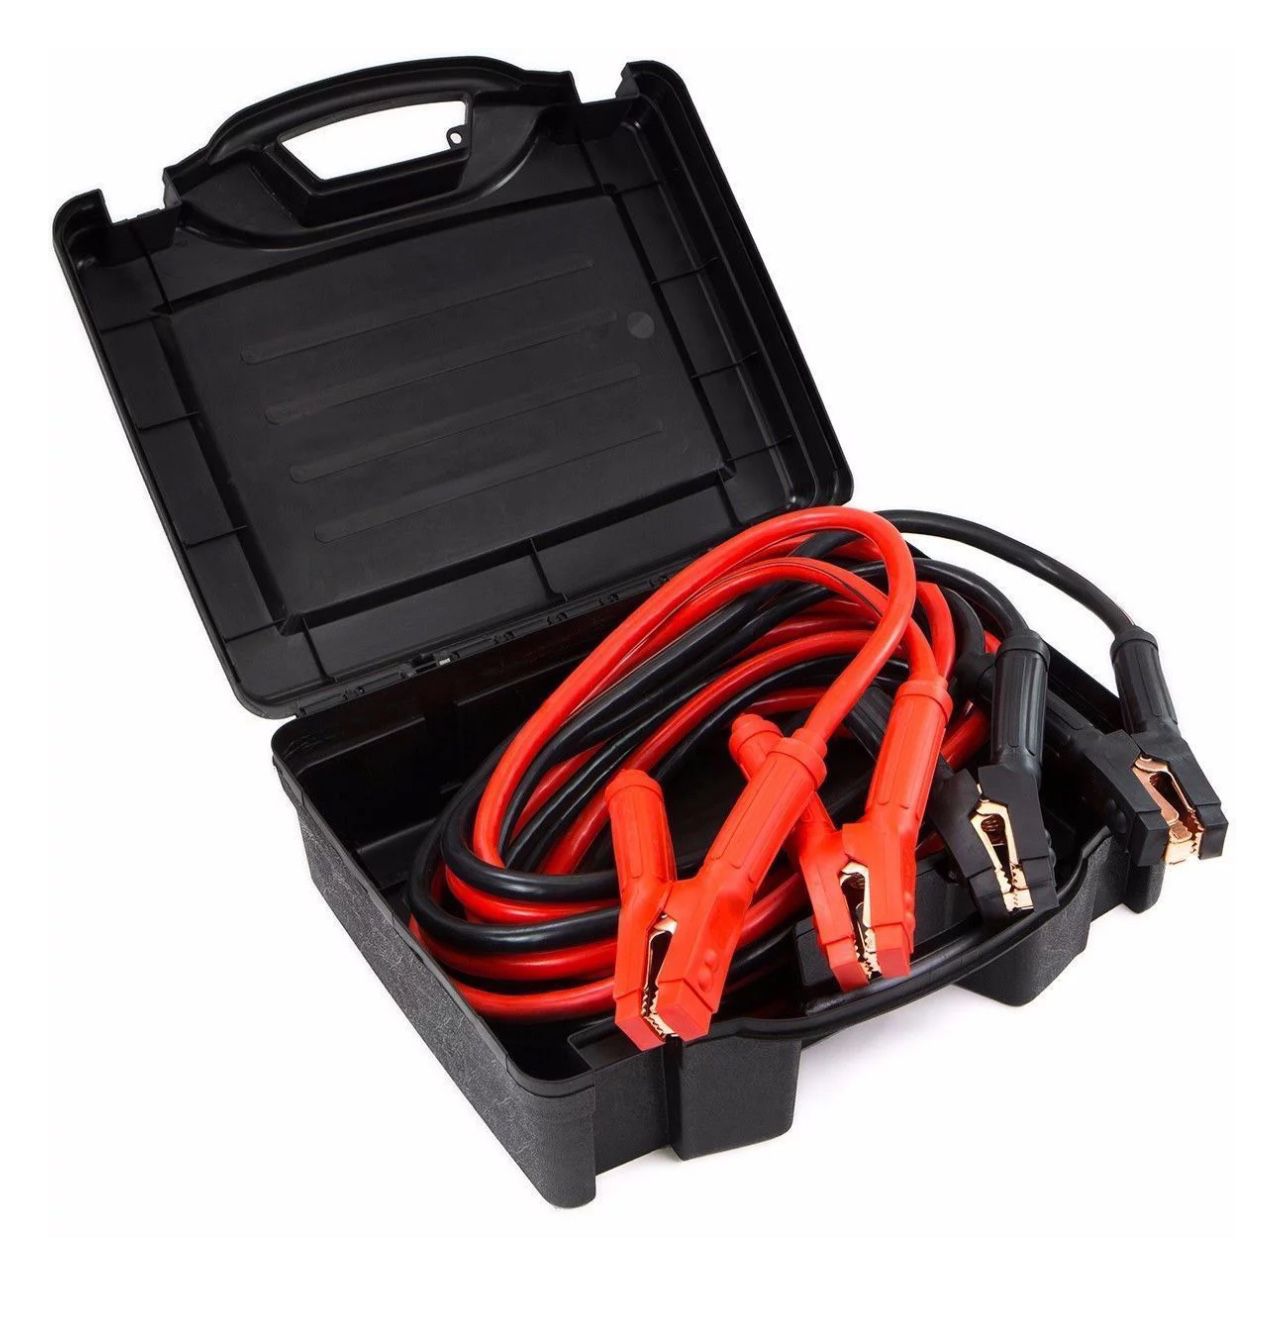 Stark 25ft Emergency Jumper Cables Auto Battery 0-Gauge Booster Camp for Cars Trucks SUV Van with Carrying Case